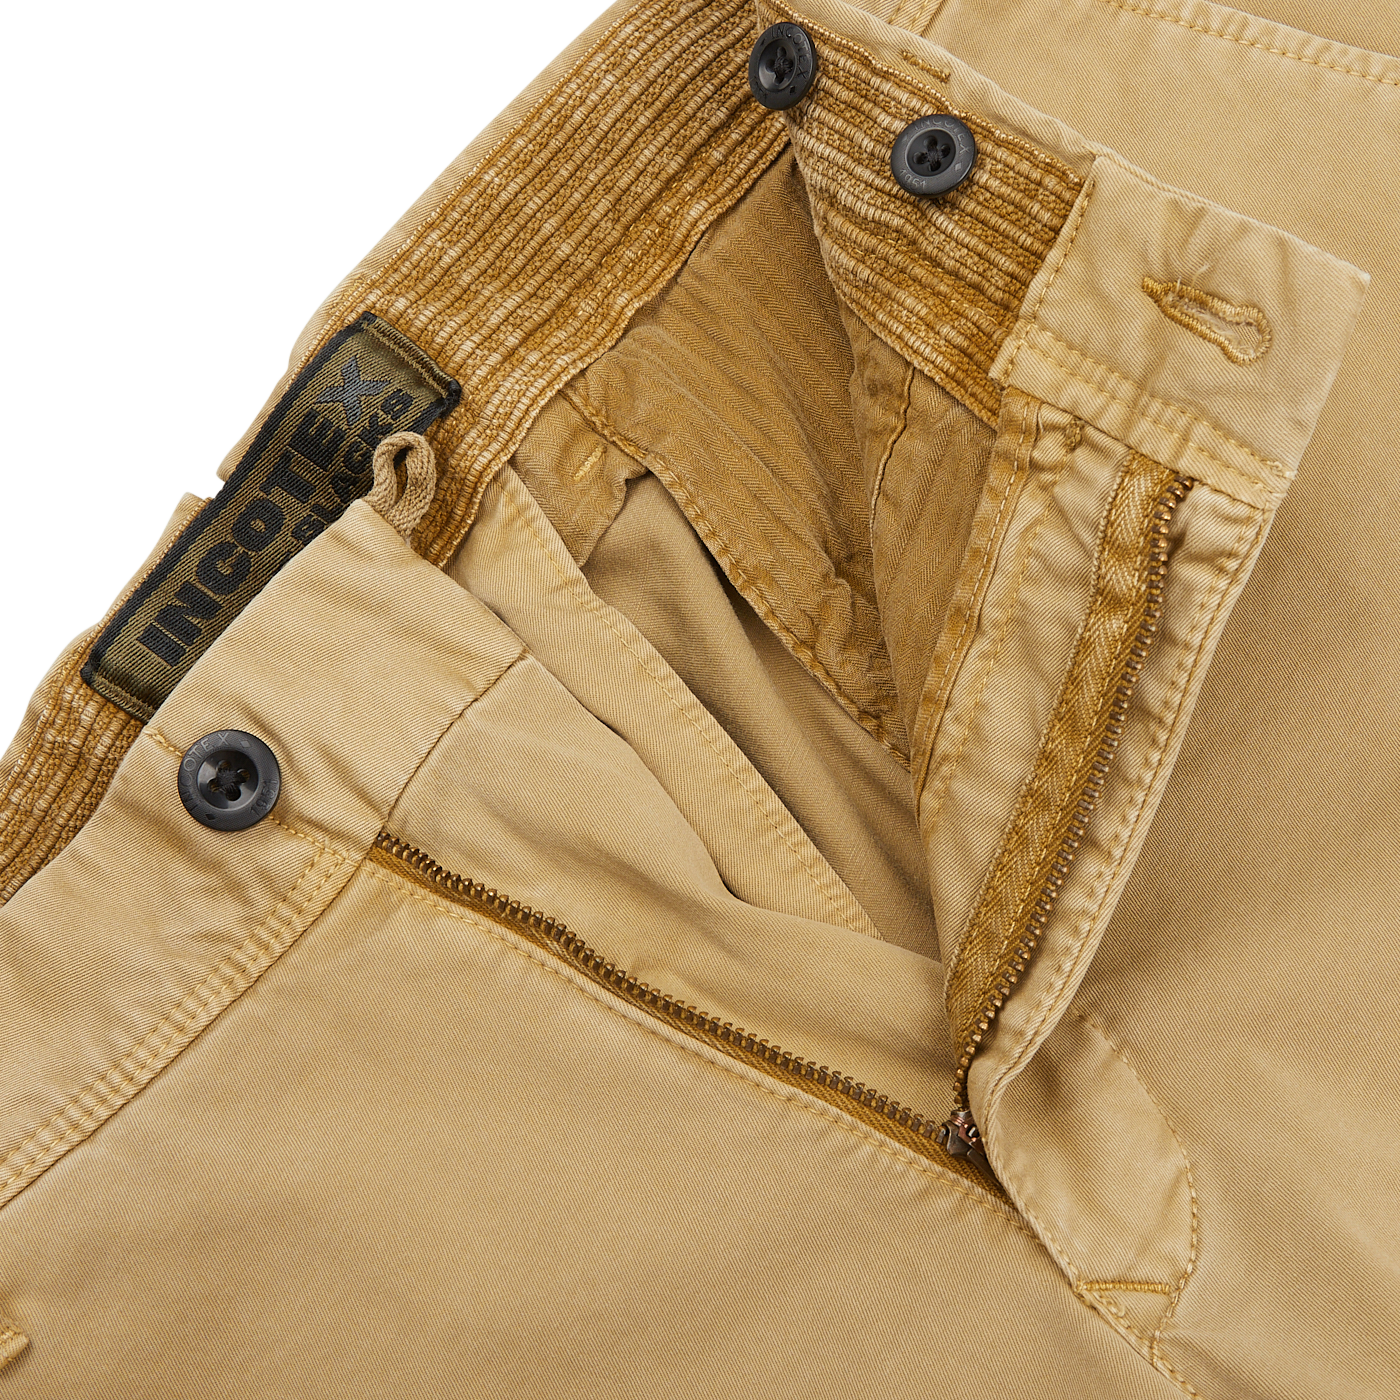 Close-up image of Dark Beige Cotton Stretch Slacks Chinos featuring a partially unbuttoned waist and open fly zipper. The label inside reads "Incotex.